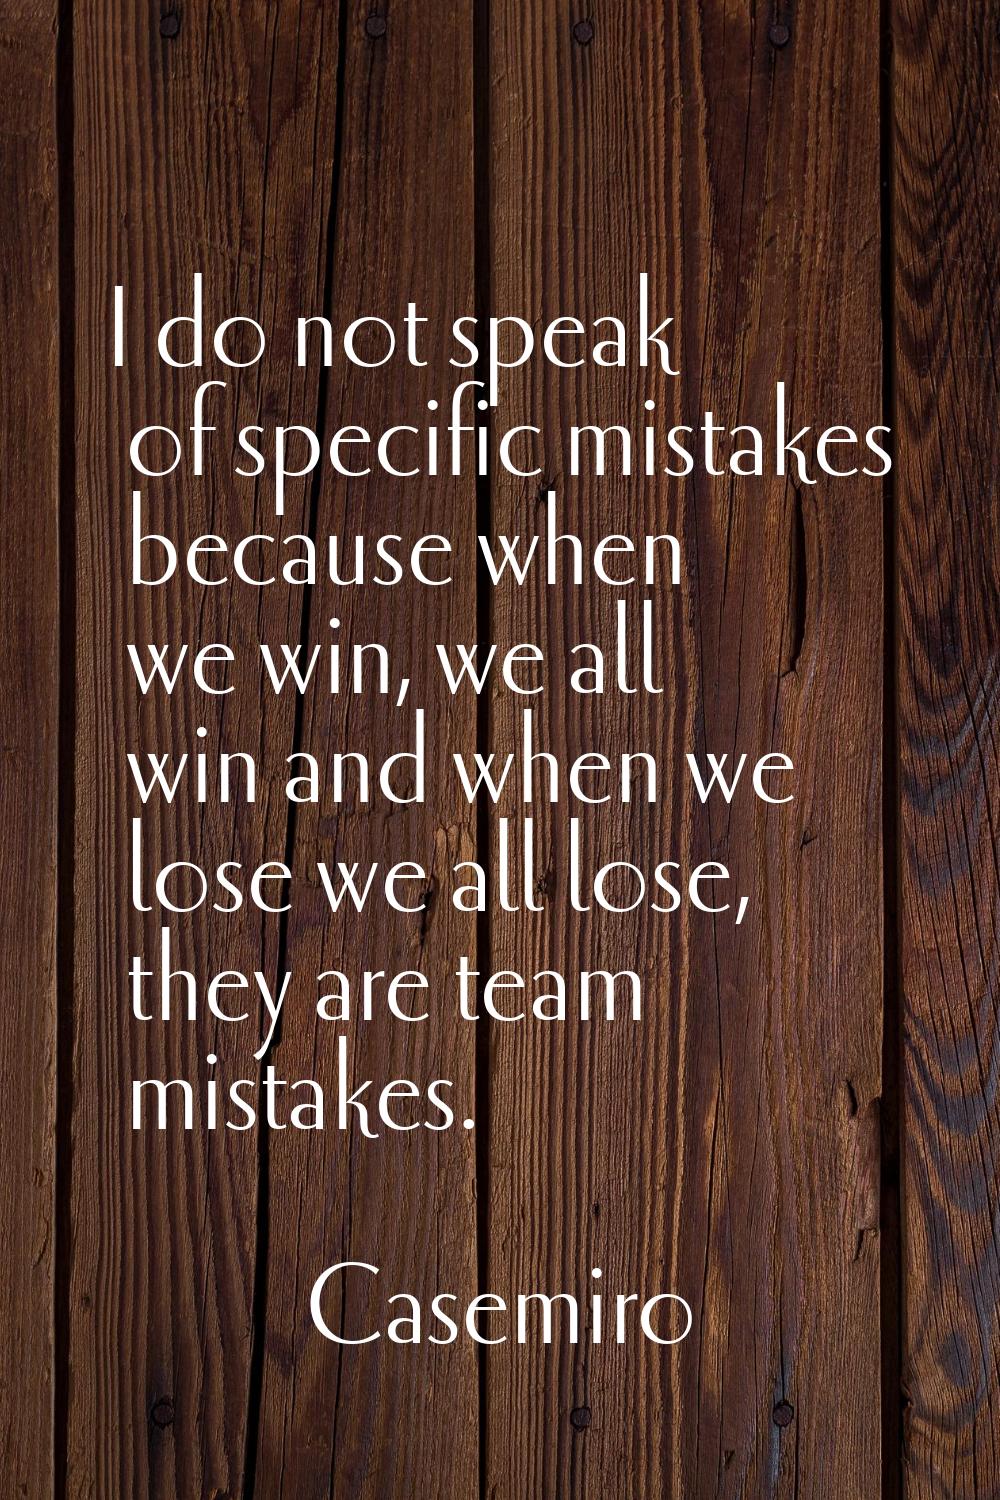 I do not speak of specific mistakes because when we win, we all win and when we lose we all lose, t